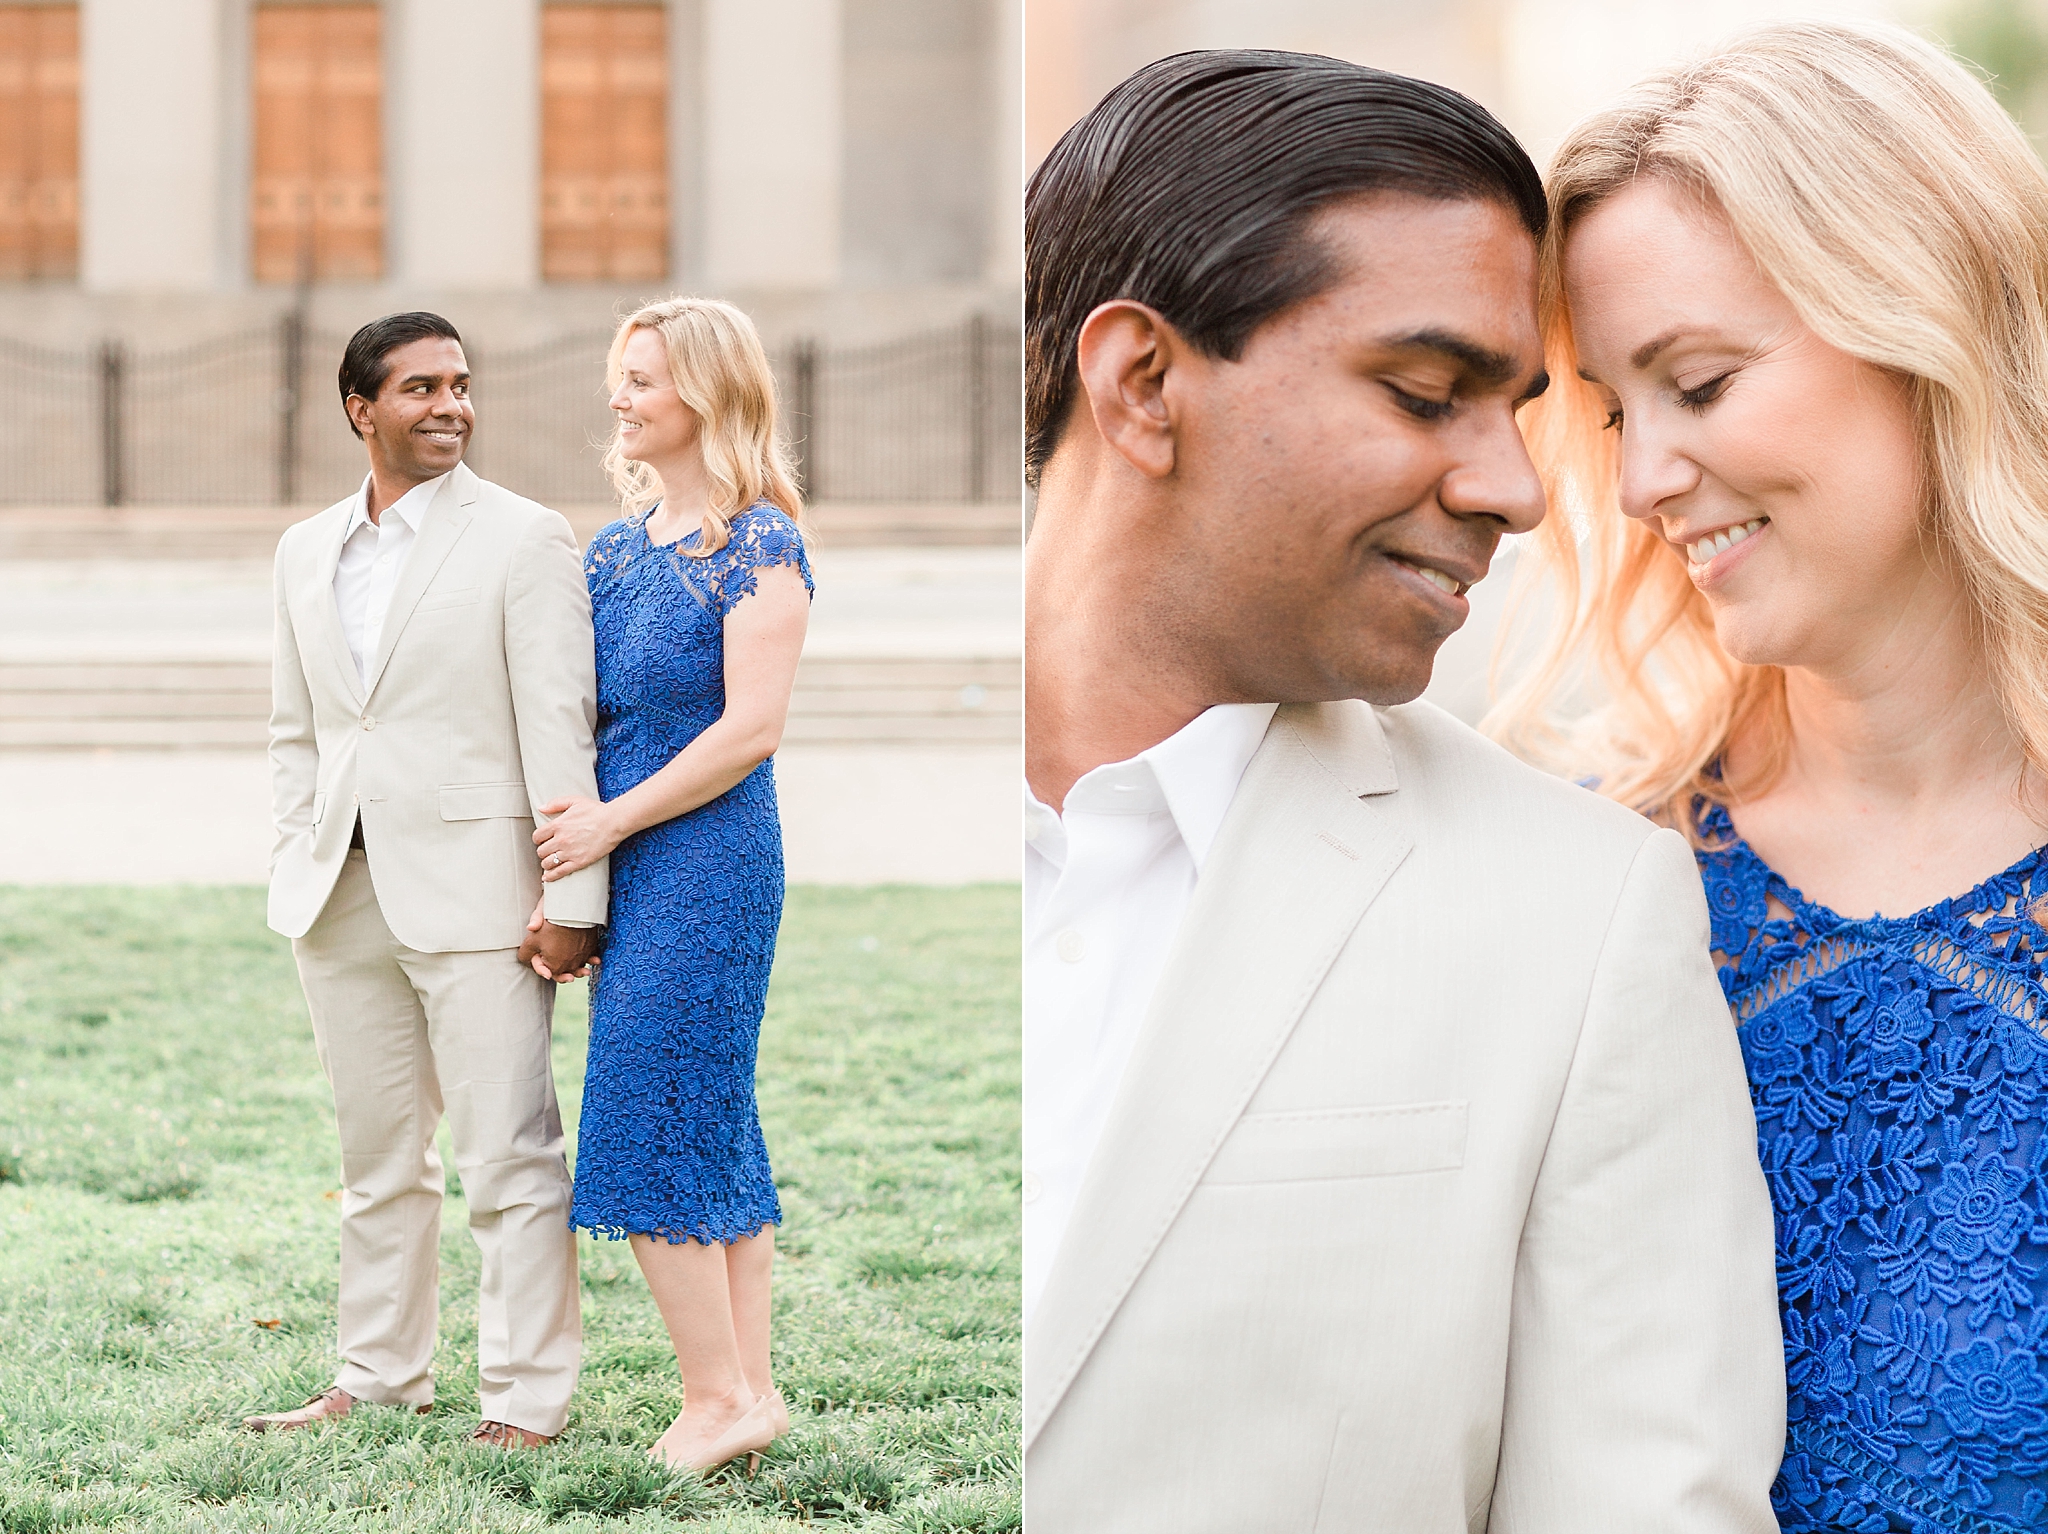 A classic and stylish sunrise engagement session in downtown Baltimore, MD.